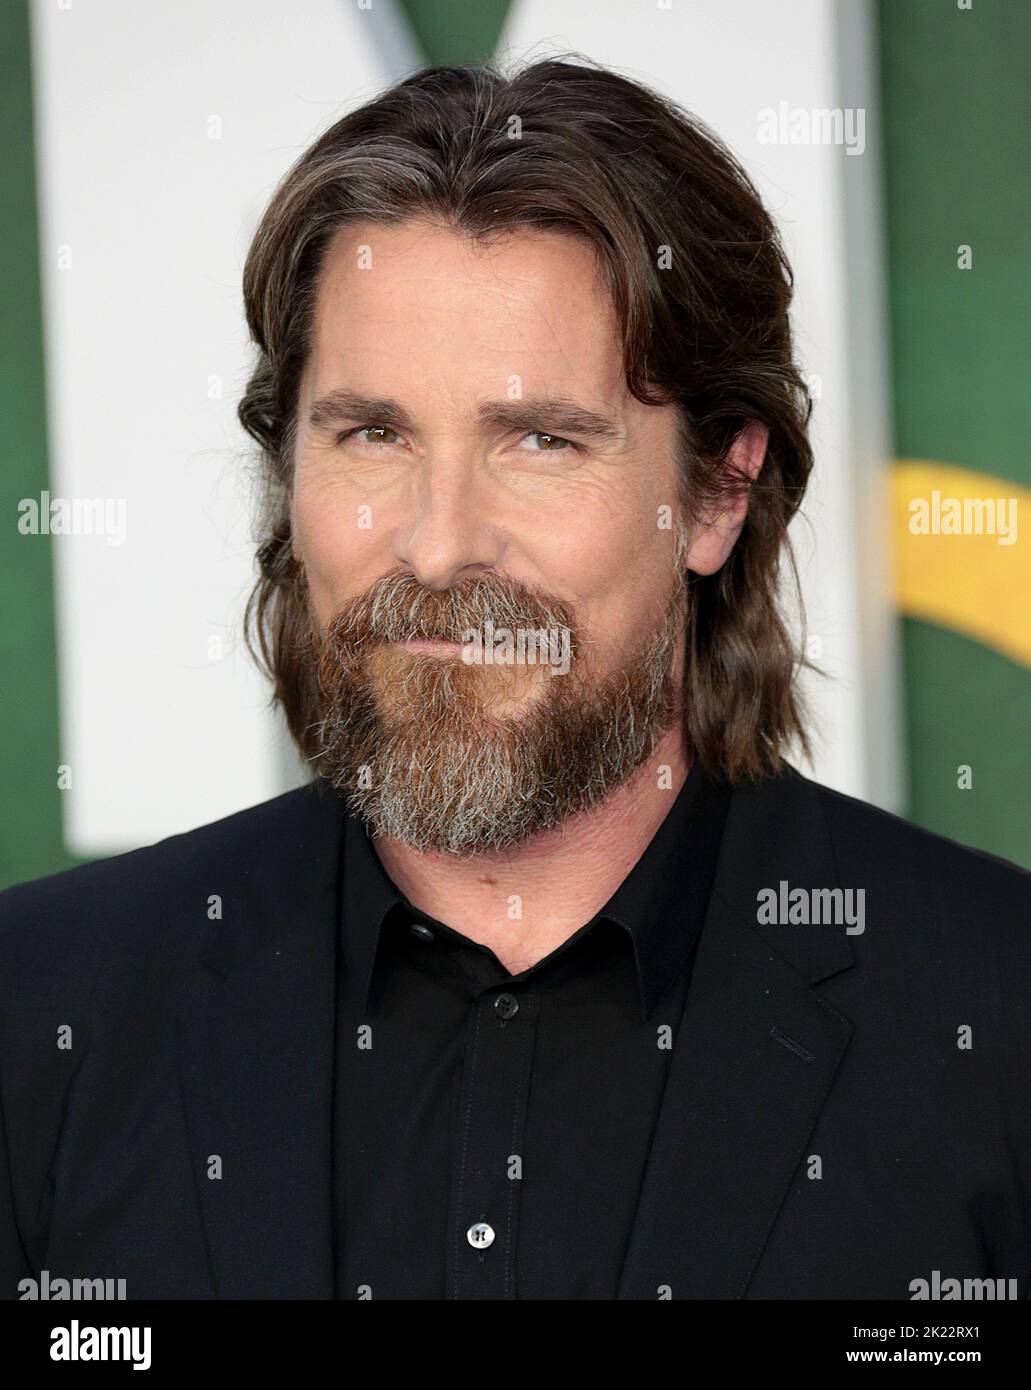 Sep 21, 2022 - London, England, UK - Christian Bale attending Amsterdam European premiere, Odeon Luxe, Leicester Square Stock Photo